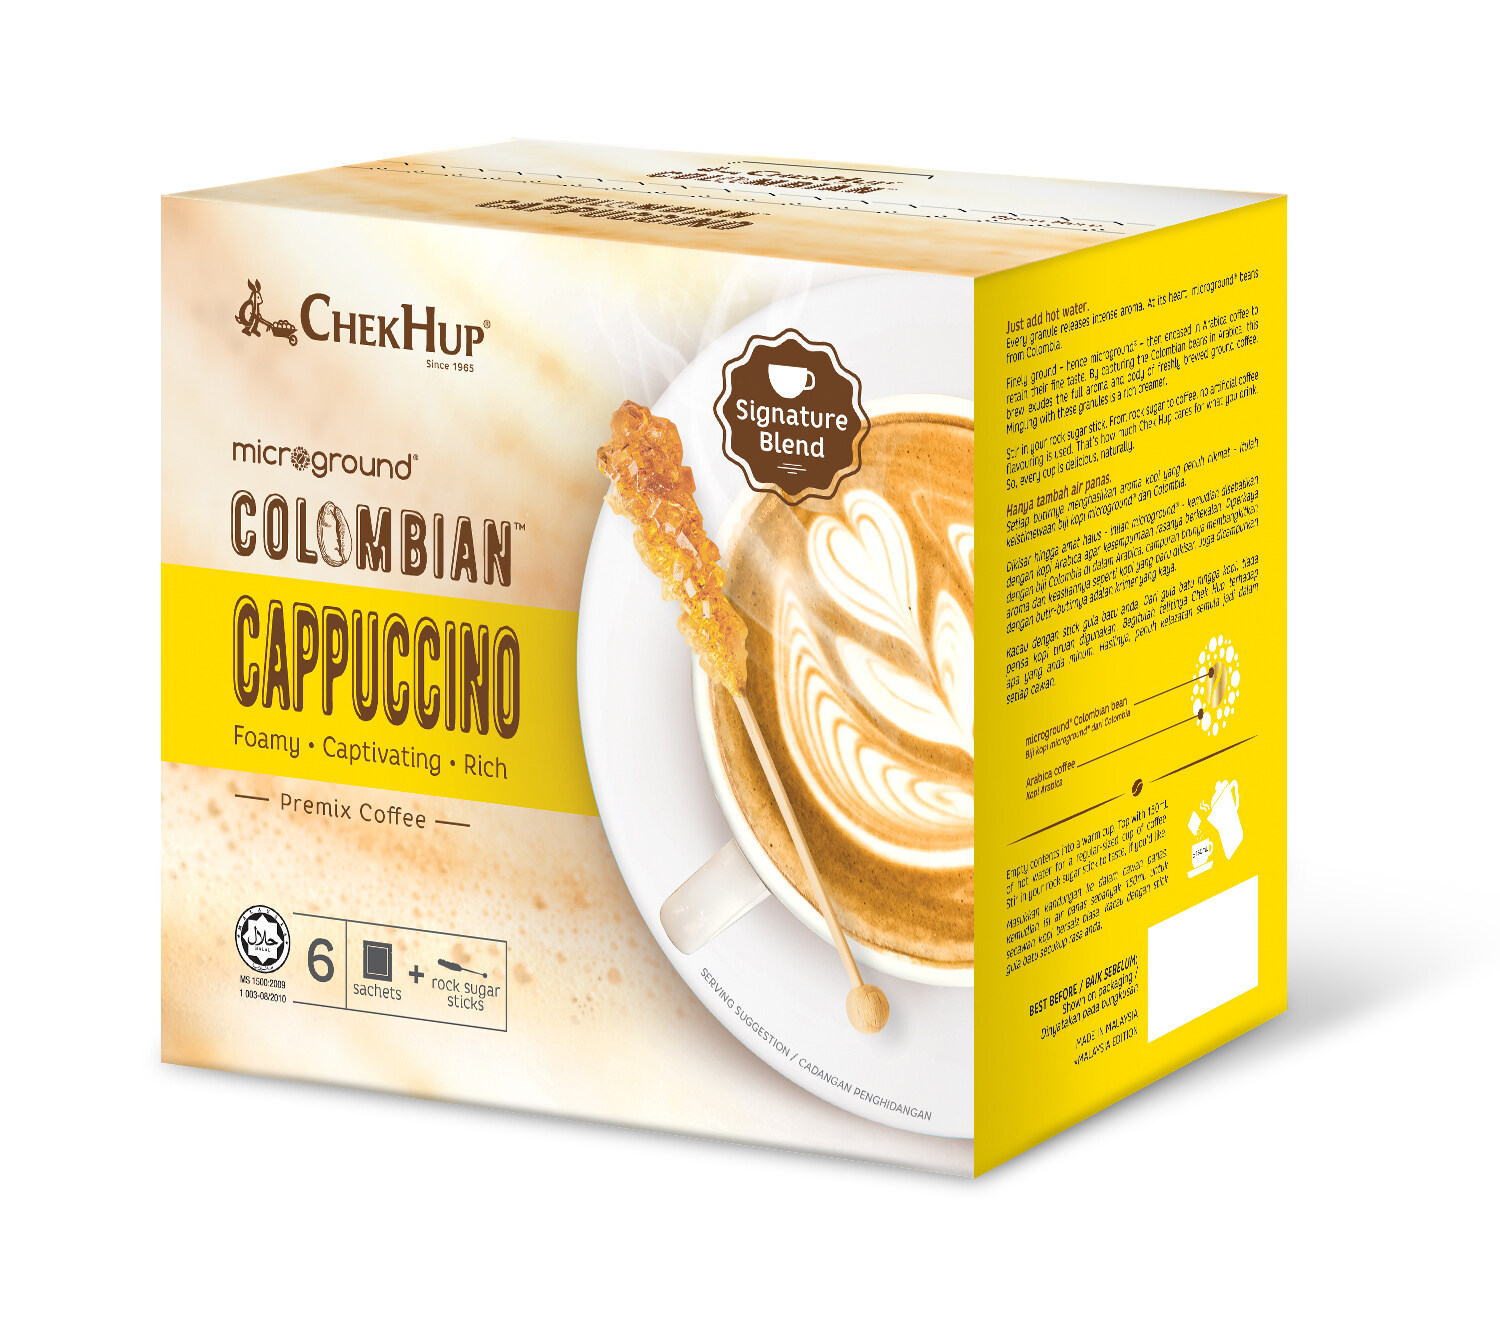 Chek Hup Microground Colombian Cappuccino (23g x 6s)